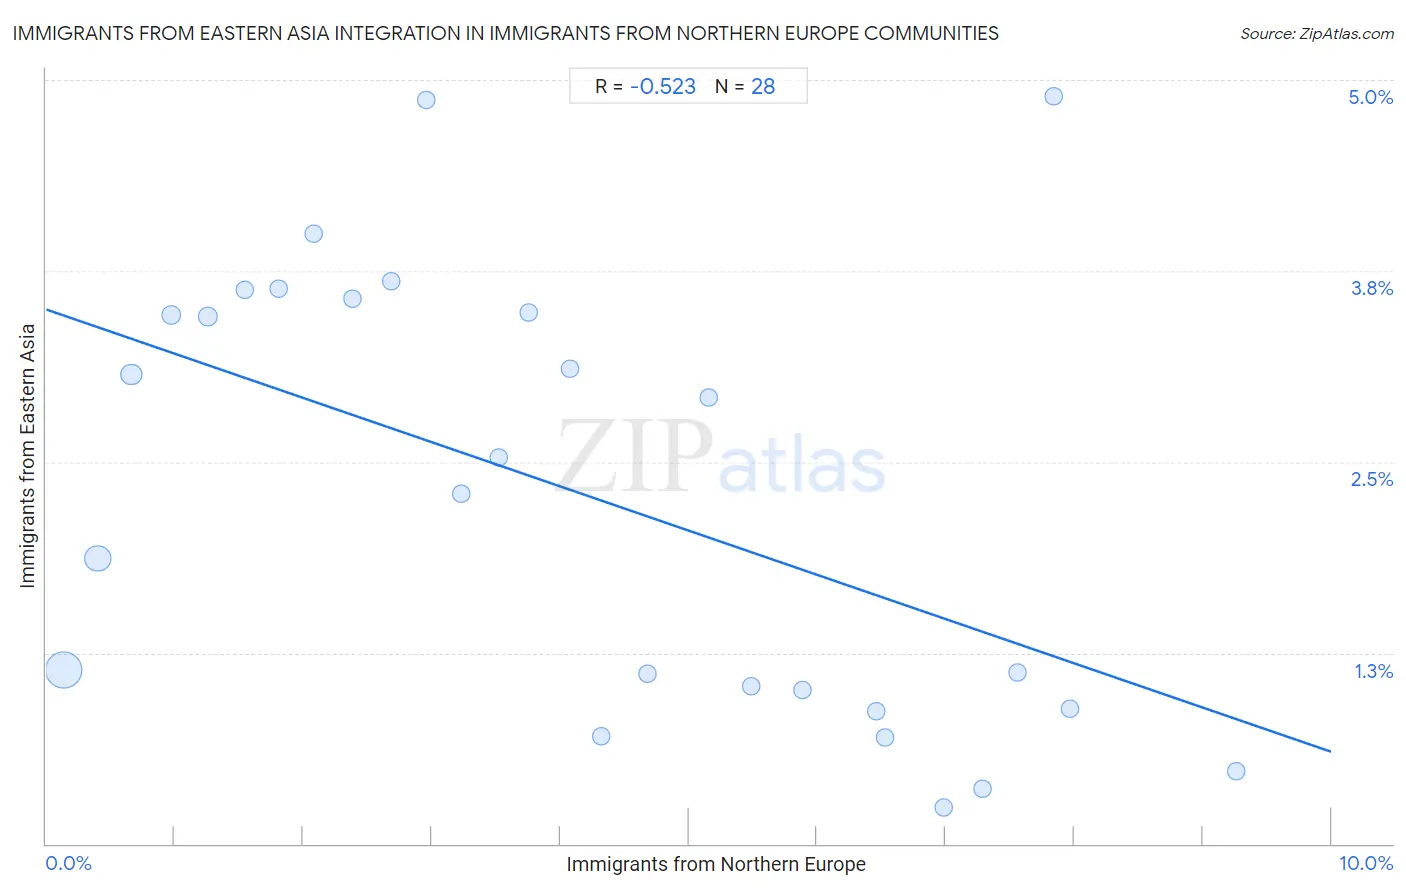 Immigrants from Northern Europe Integration in Immigrants from Eastern Asia Communities